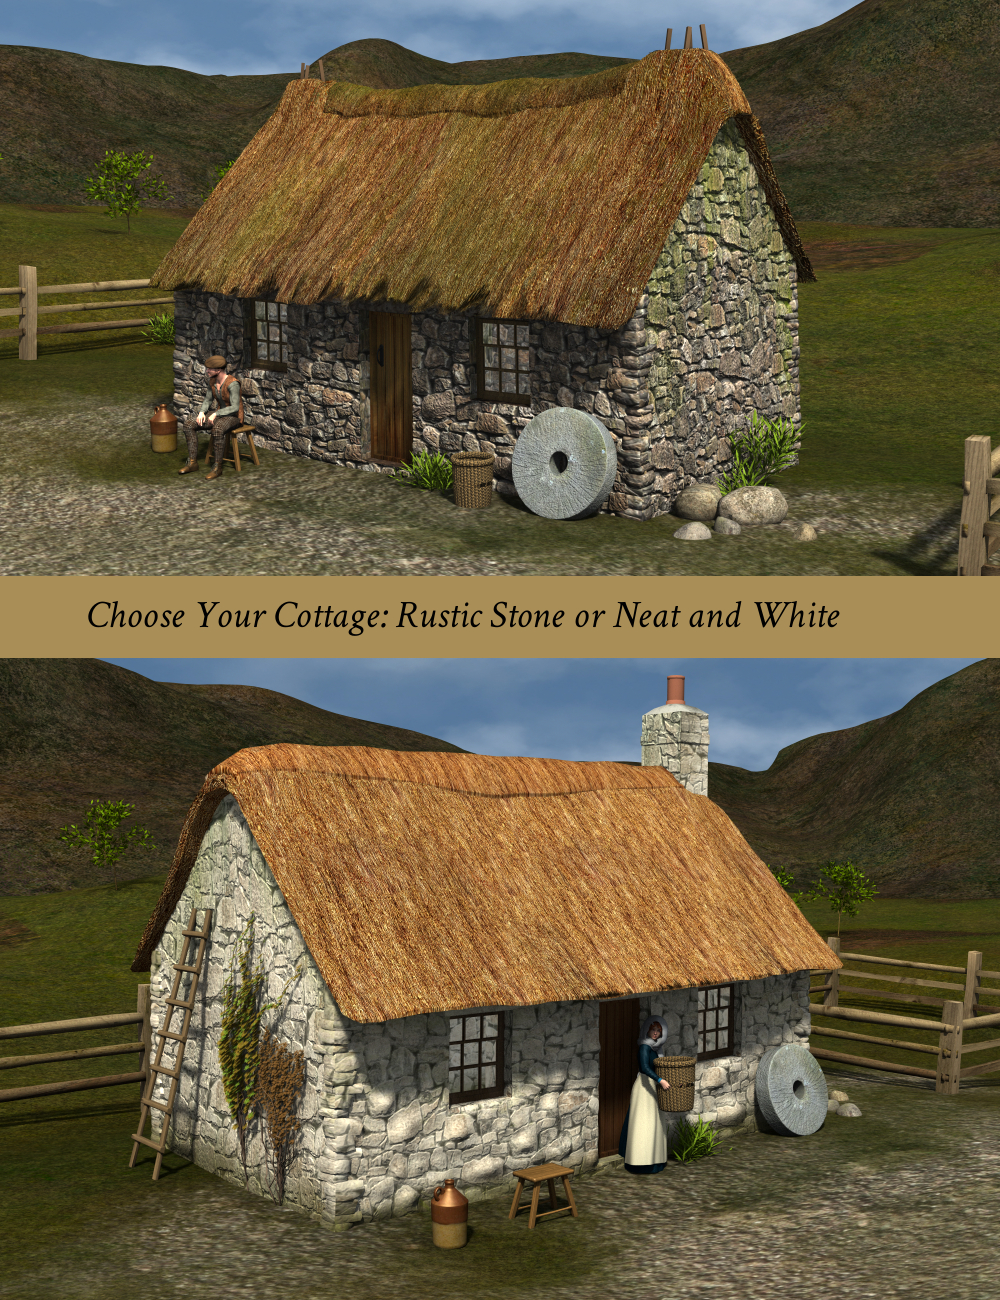 Humble Homestead in the Hills by: Inkara, 3D Models by Daz 3D